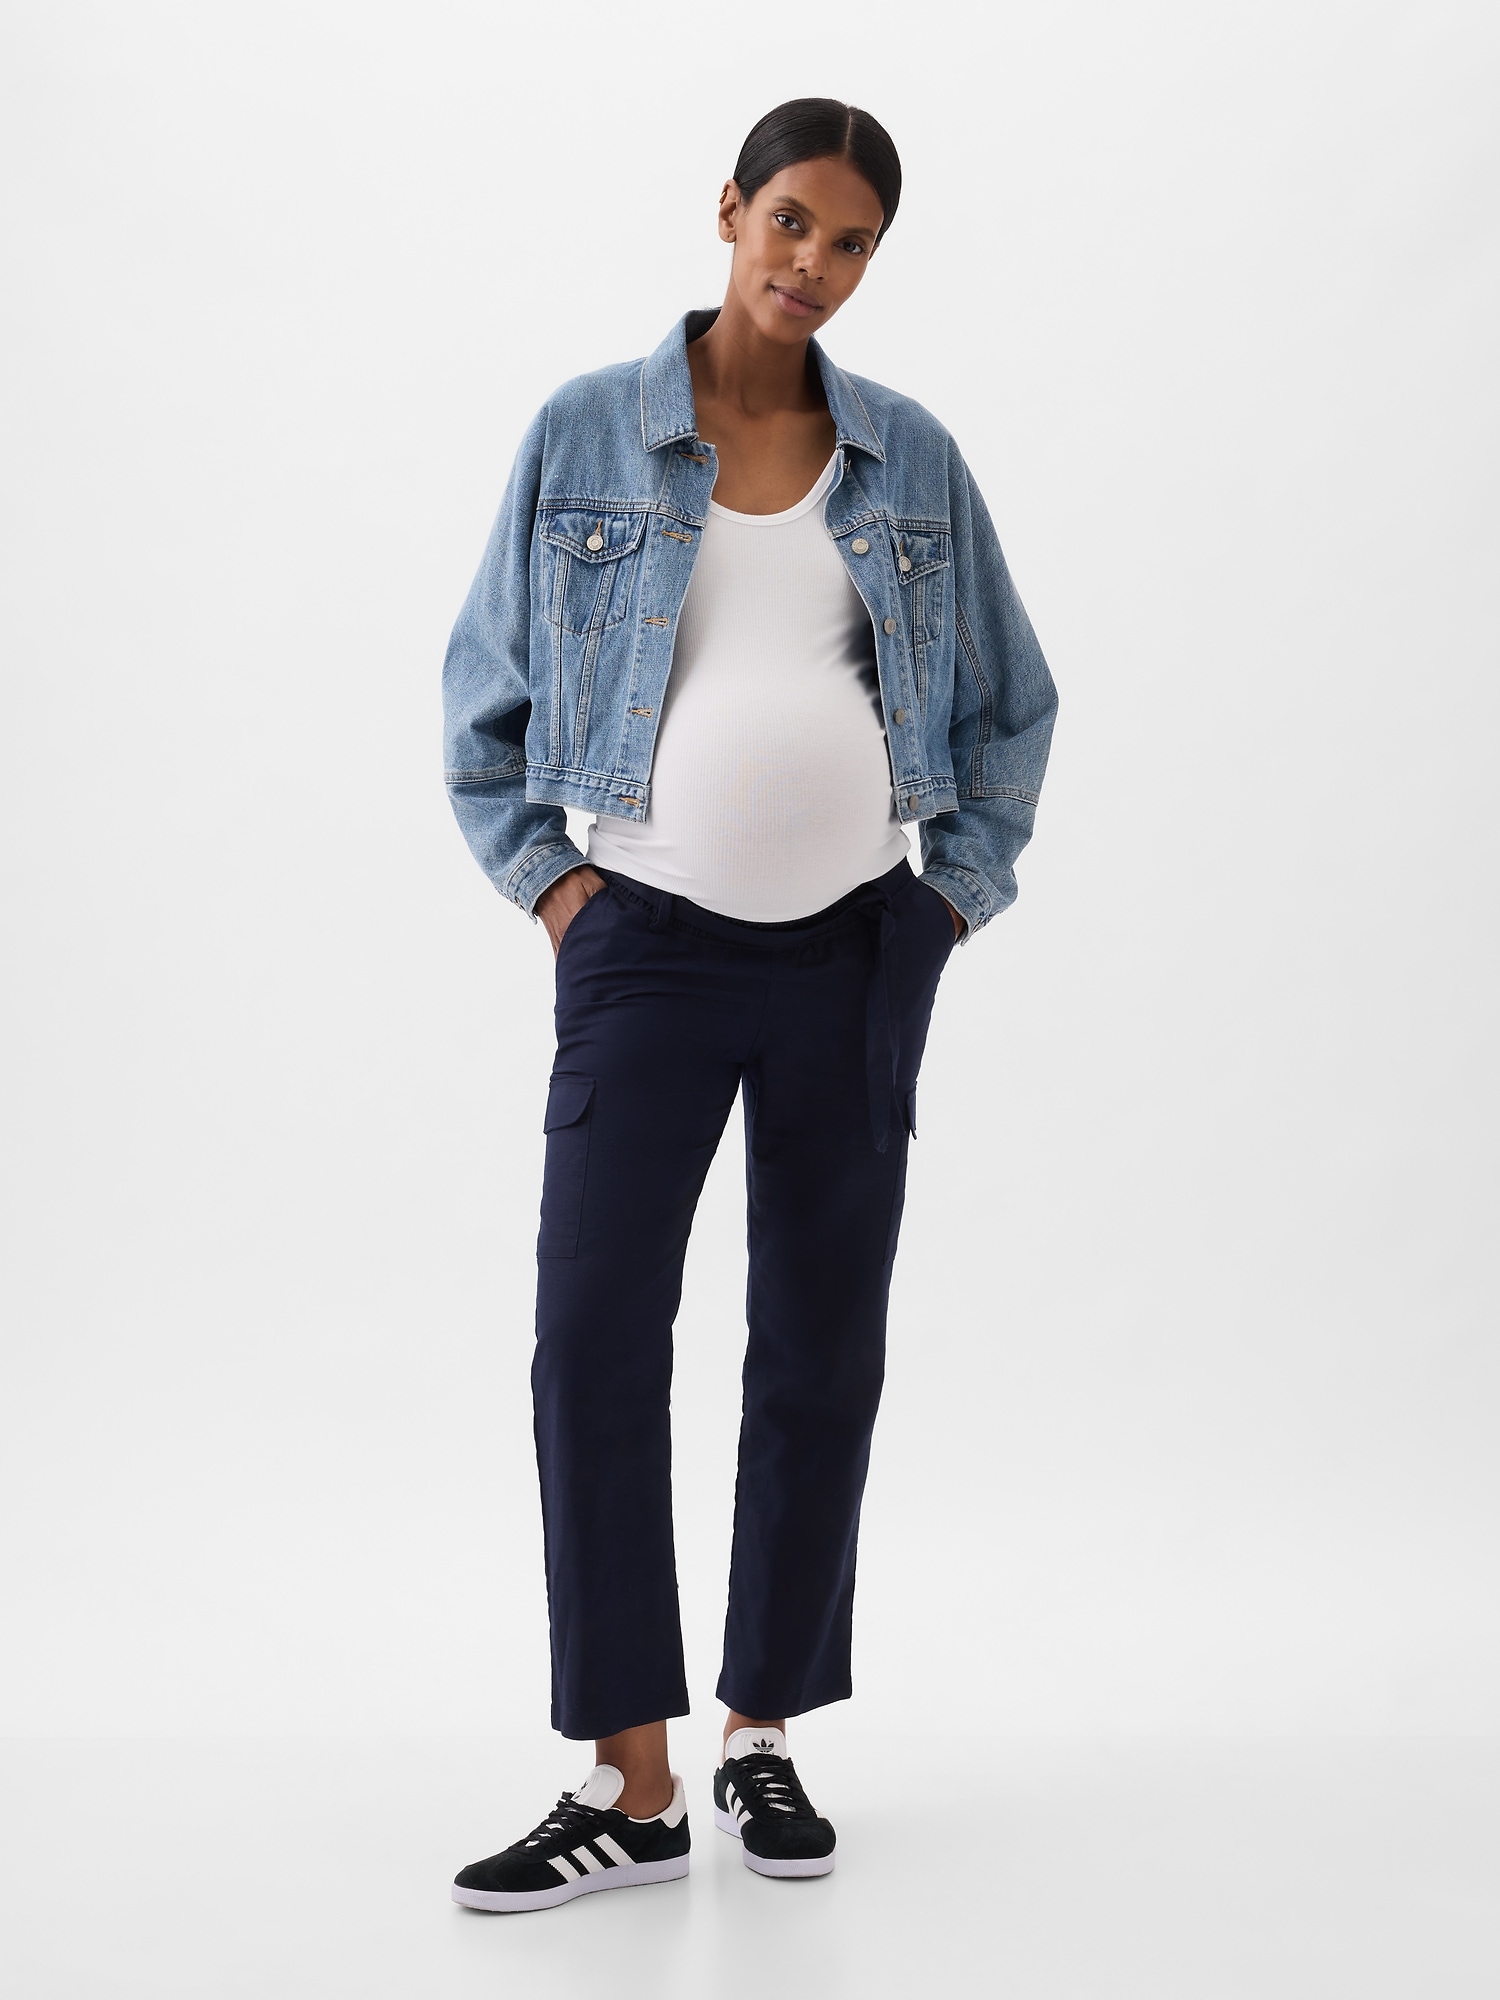 Gap Maternity Size L maternity Jeans – M&C Clothing and Gifts